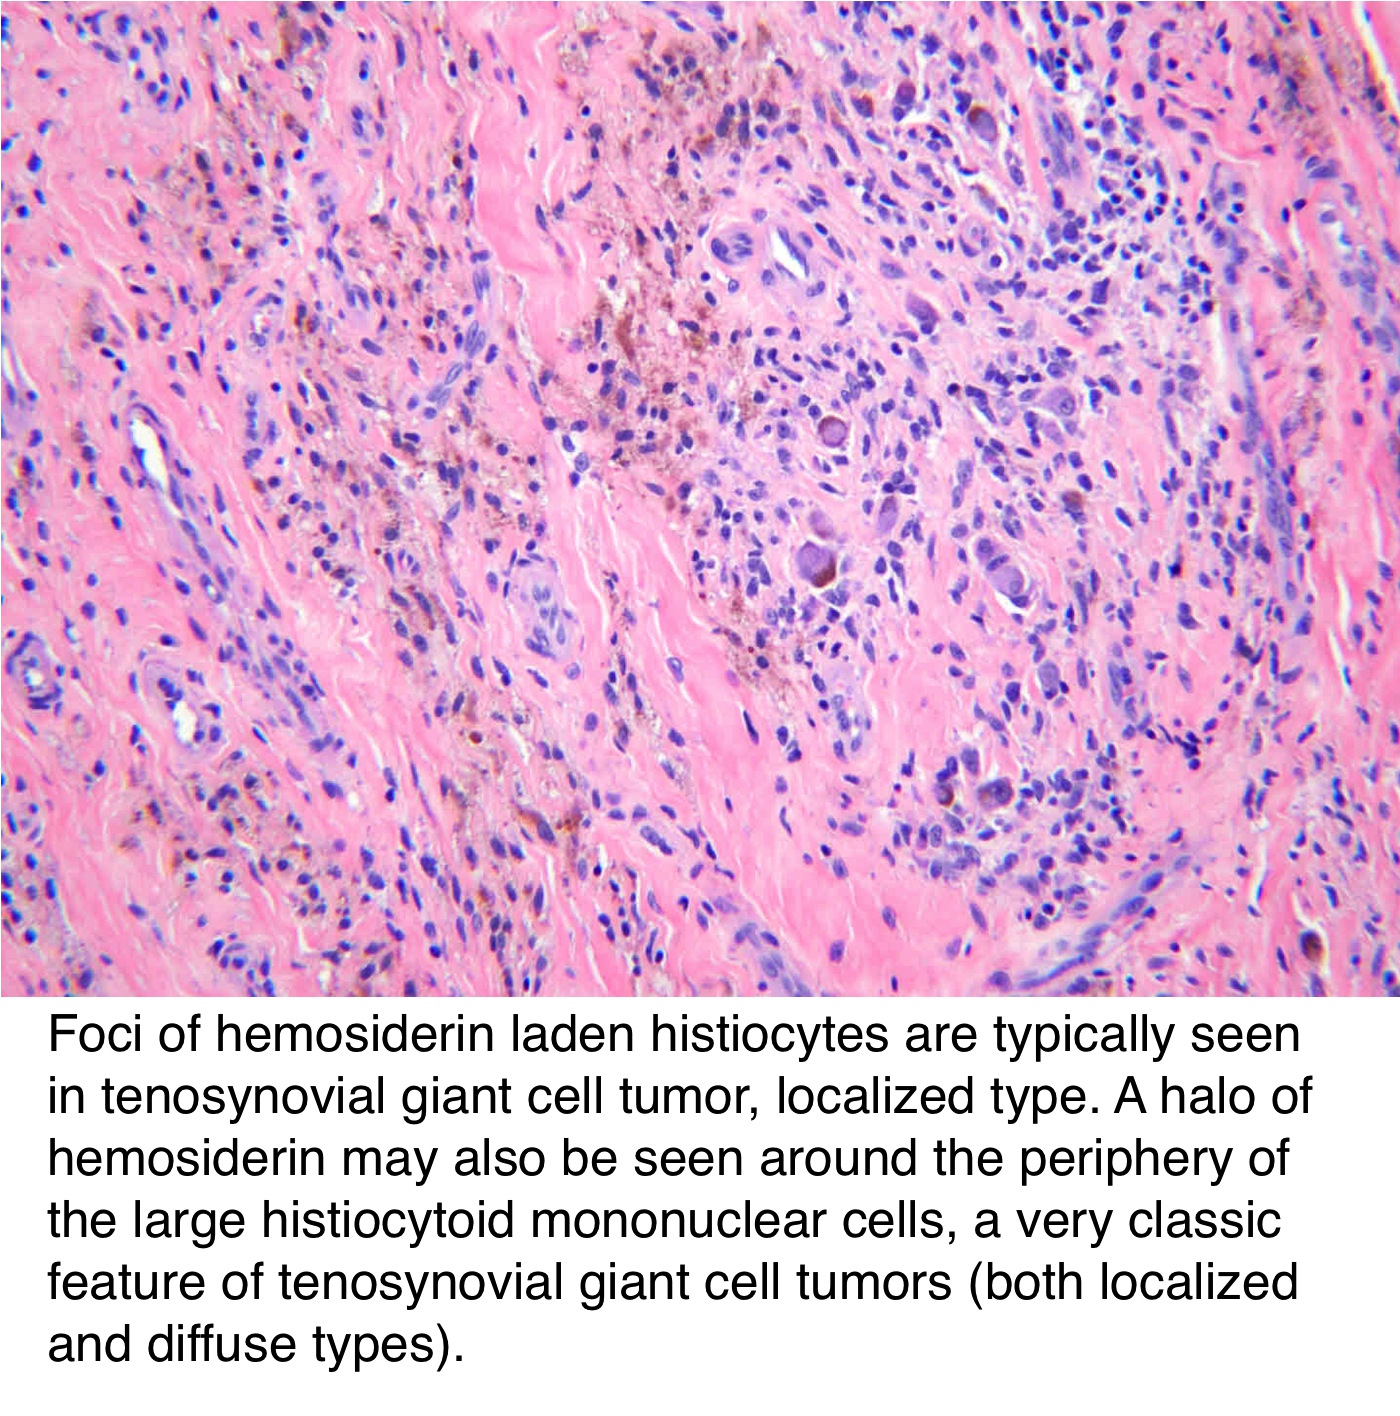 Pathology Outlines Tenosynovial Giant Cell Tumor Localized Type